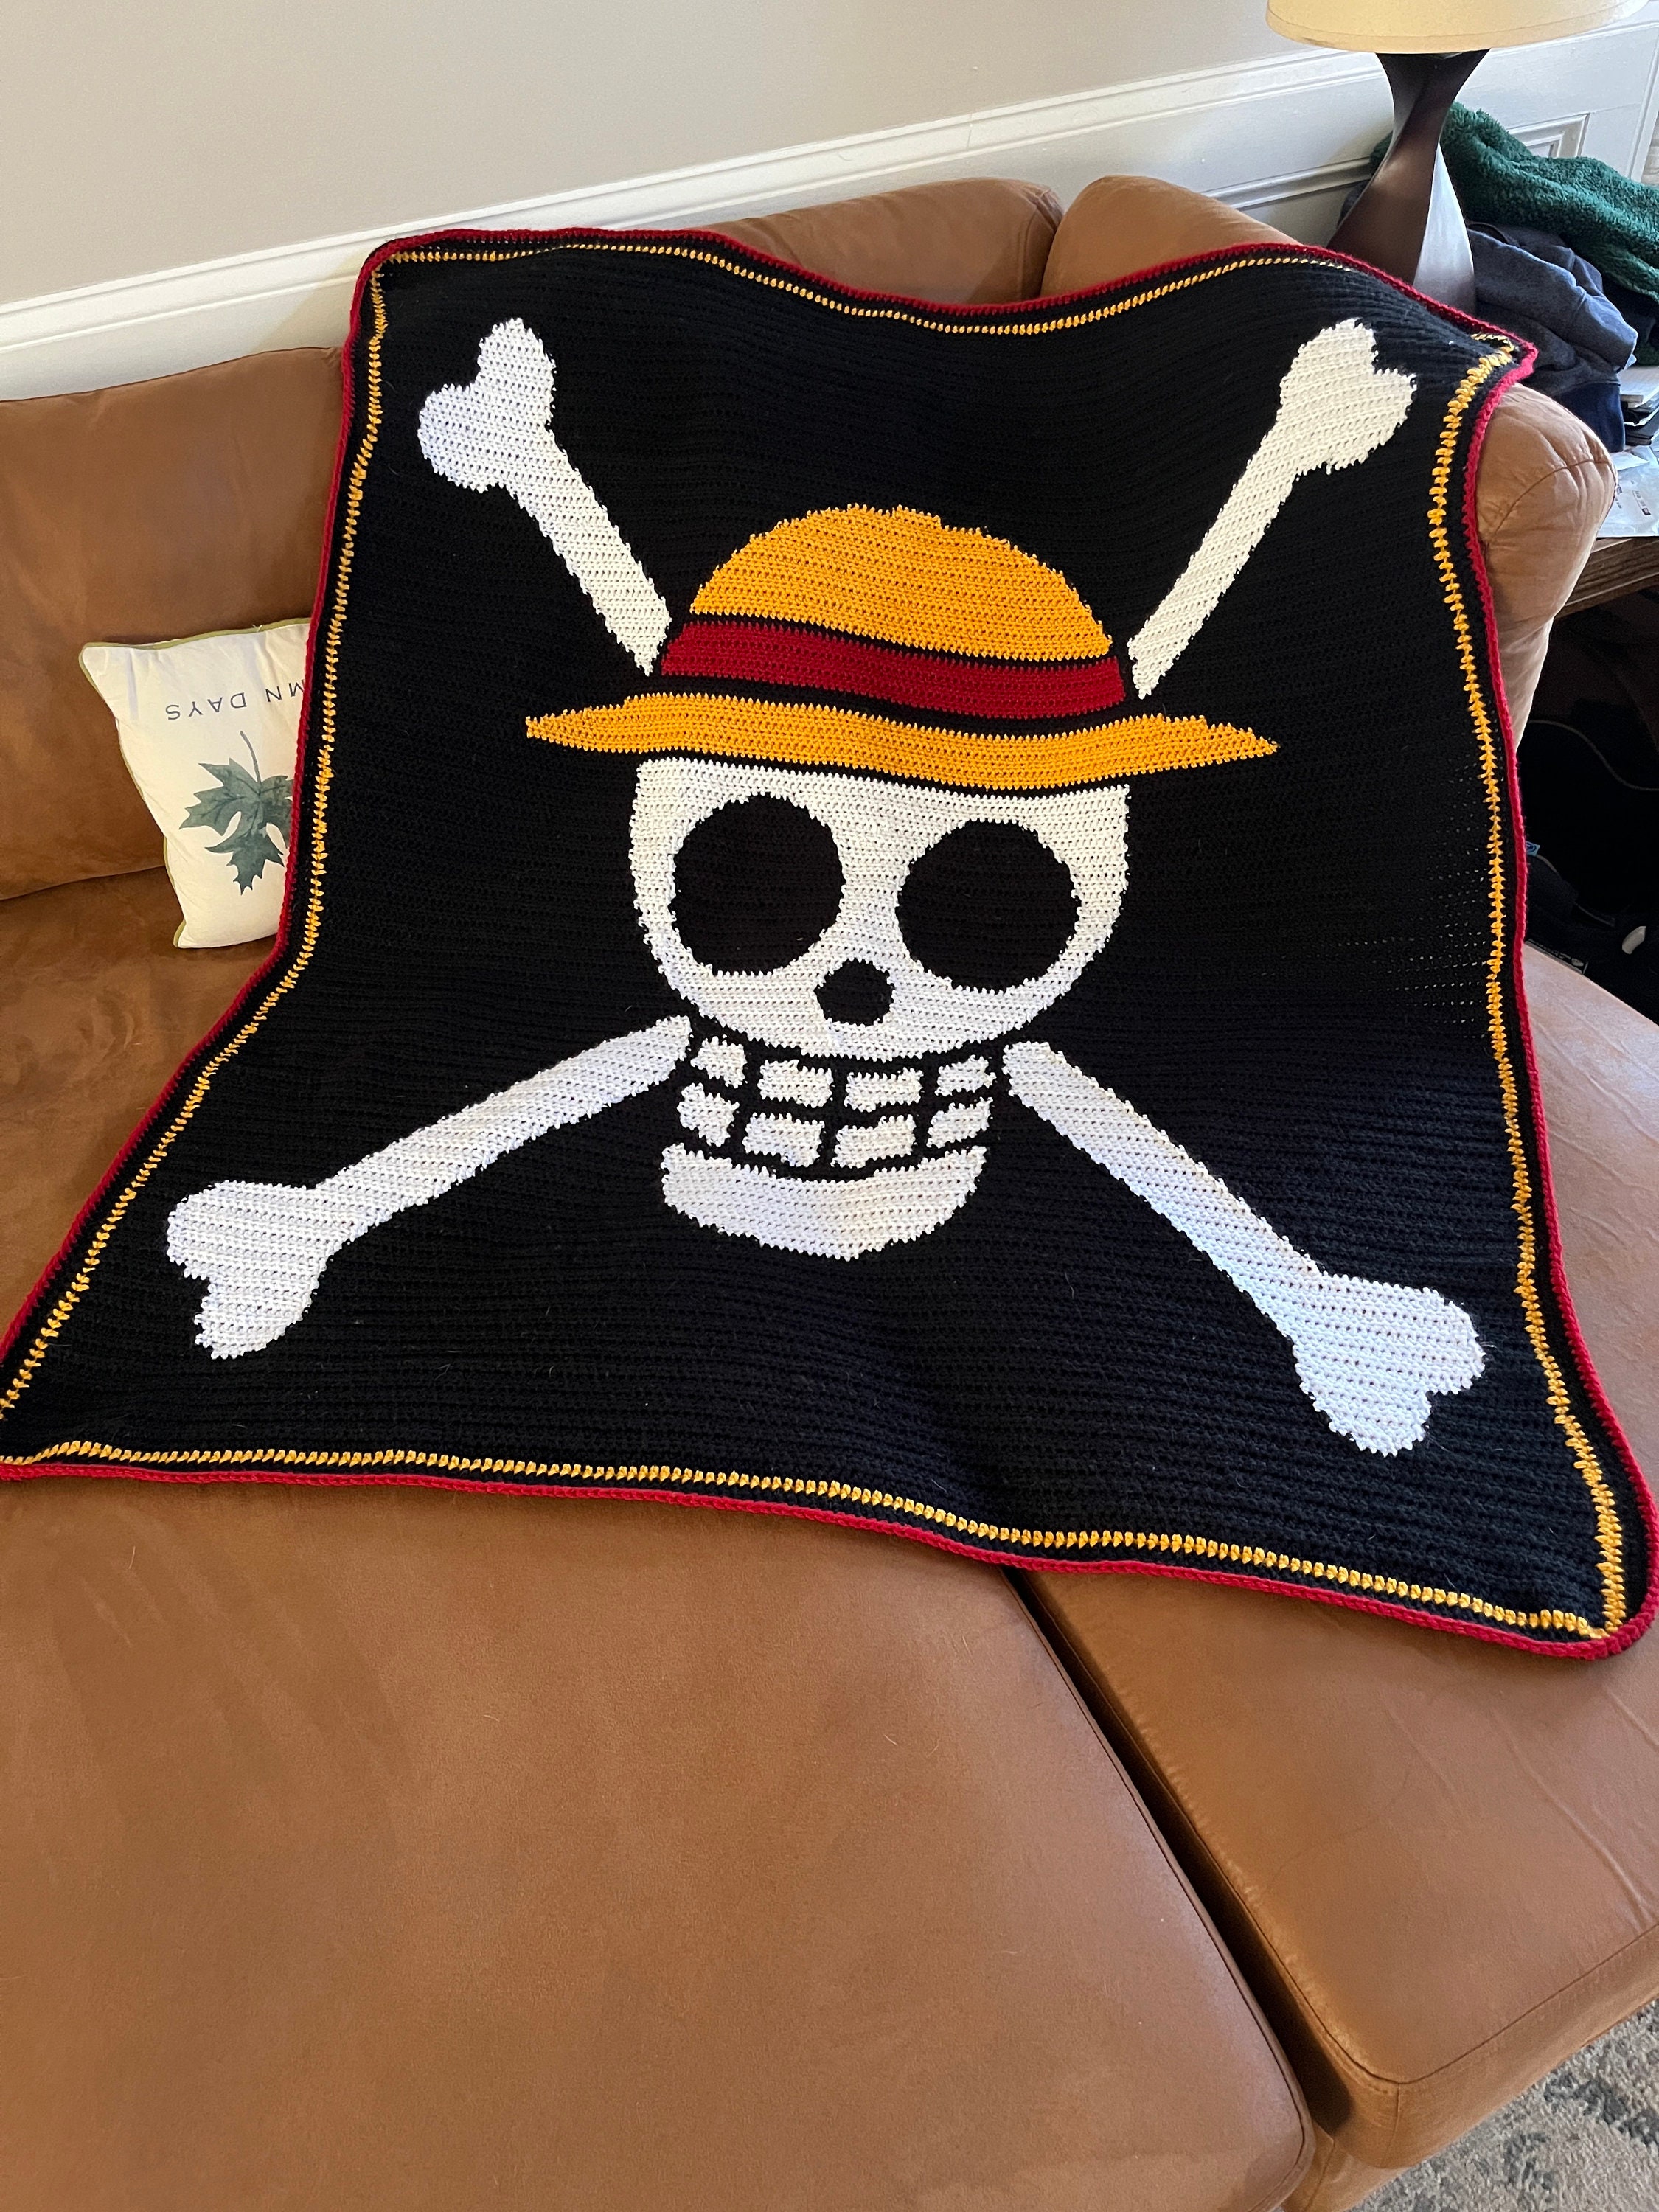 One Piece Anime Inspired Crochet Blanket pattern Only - Etsy